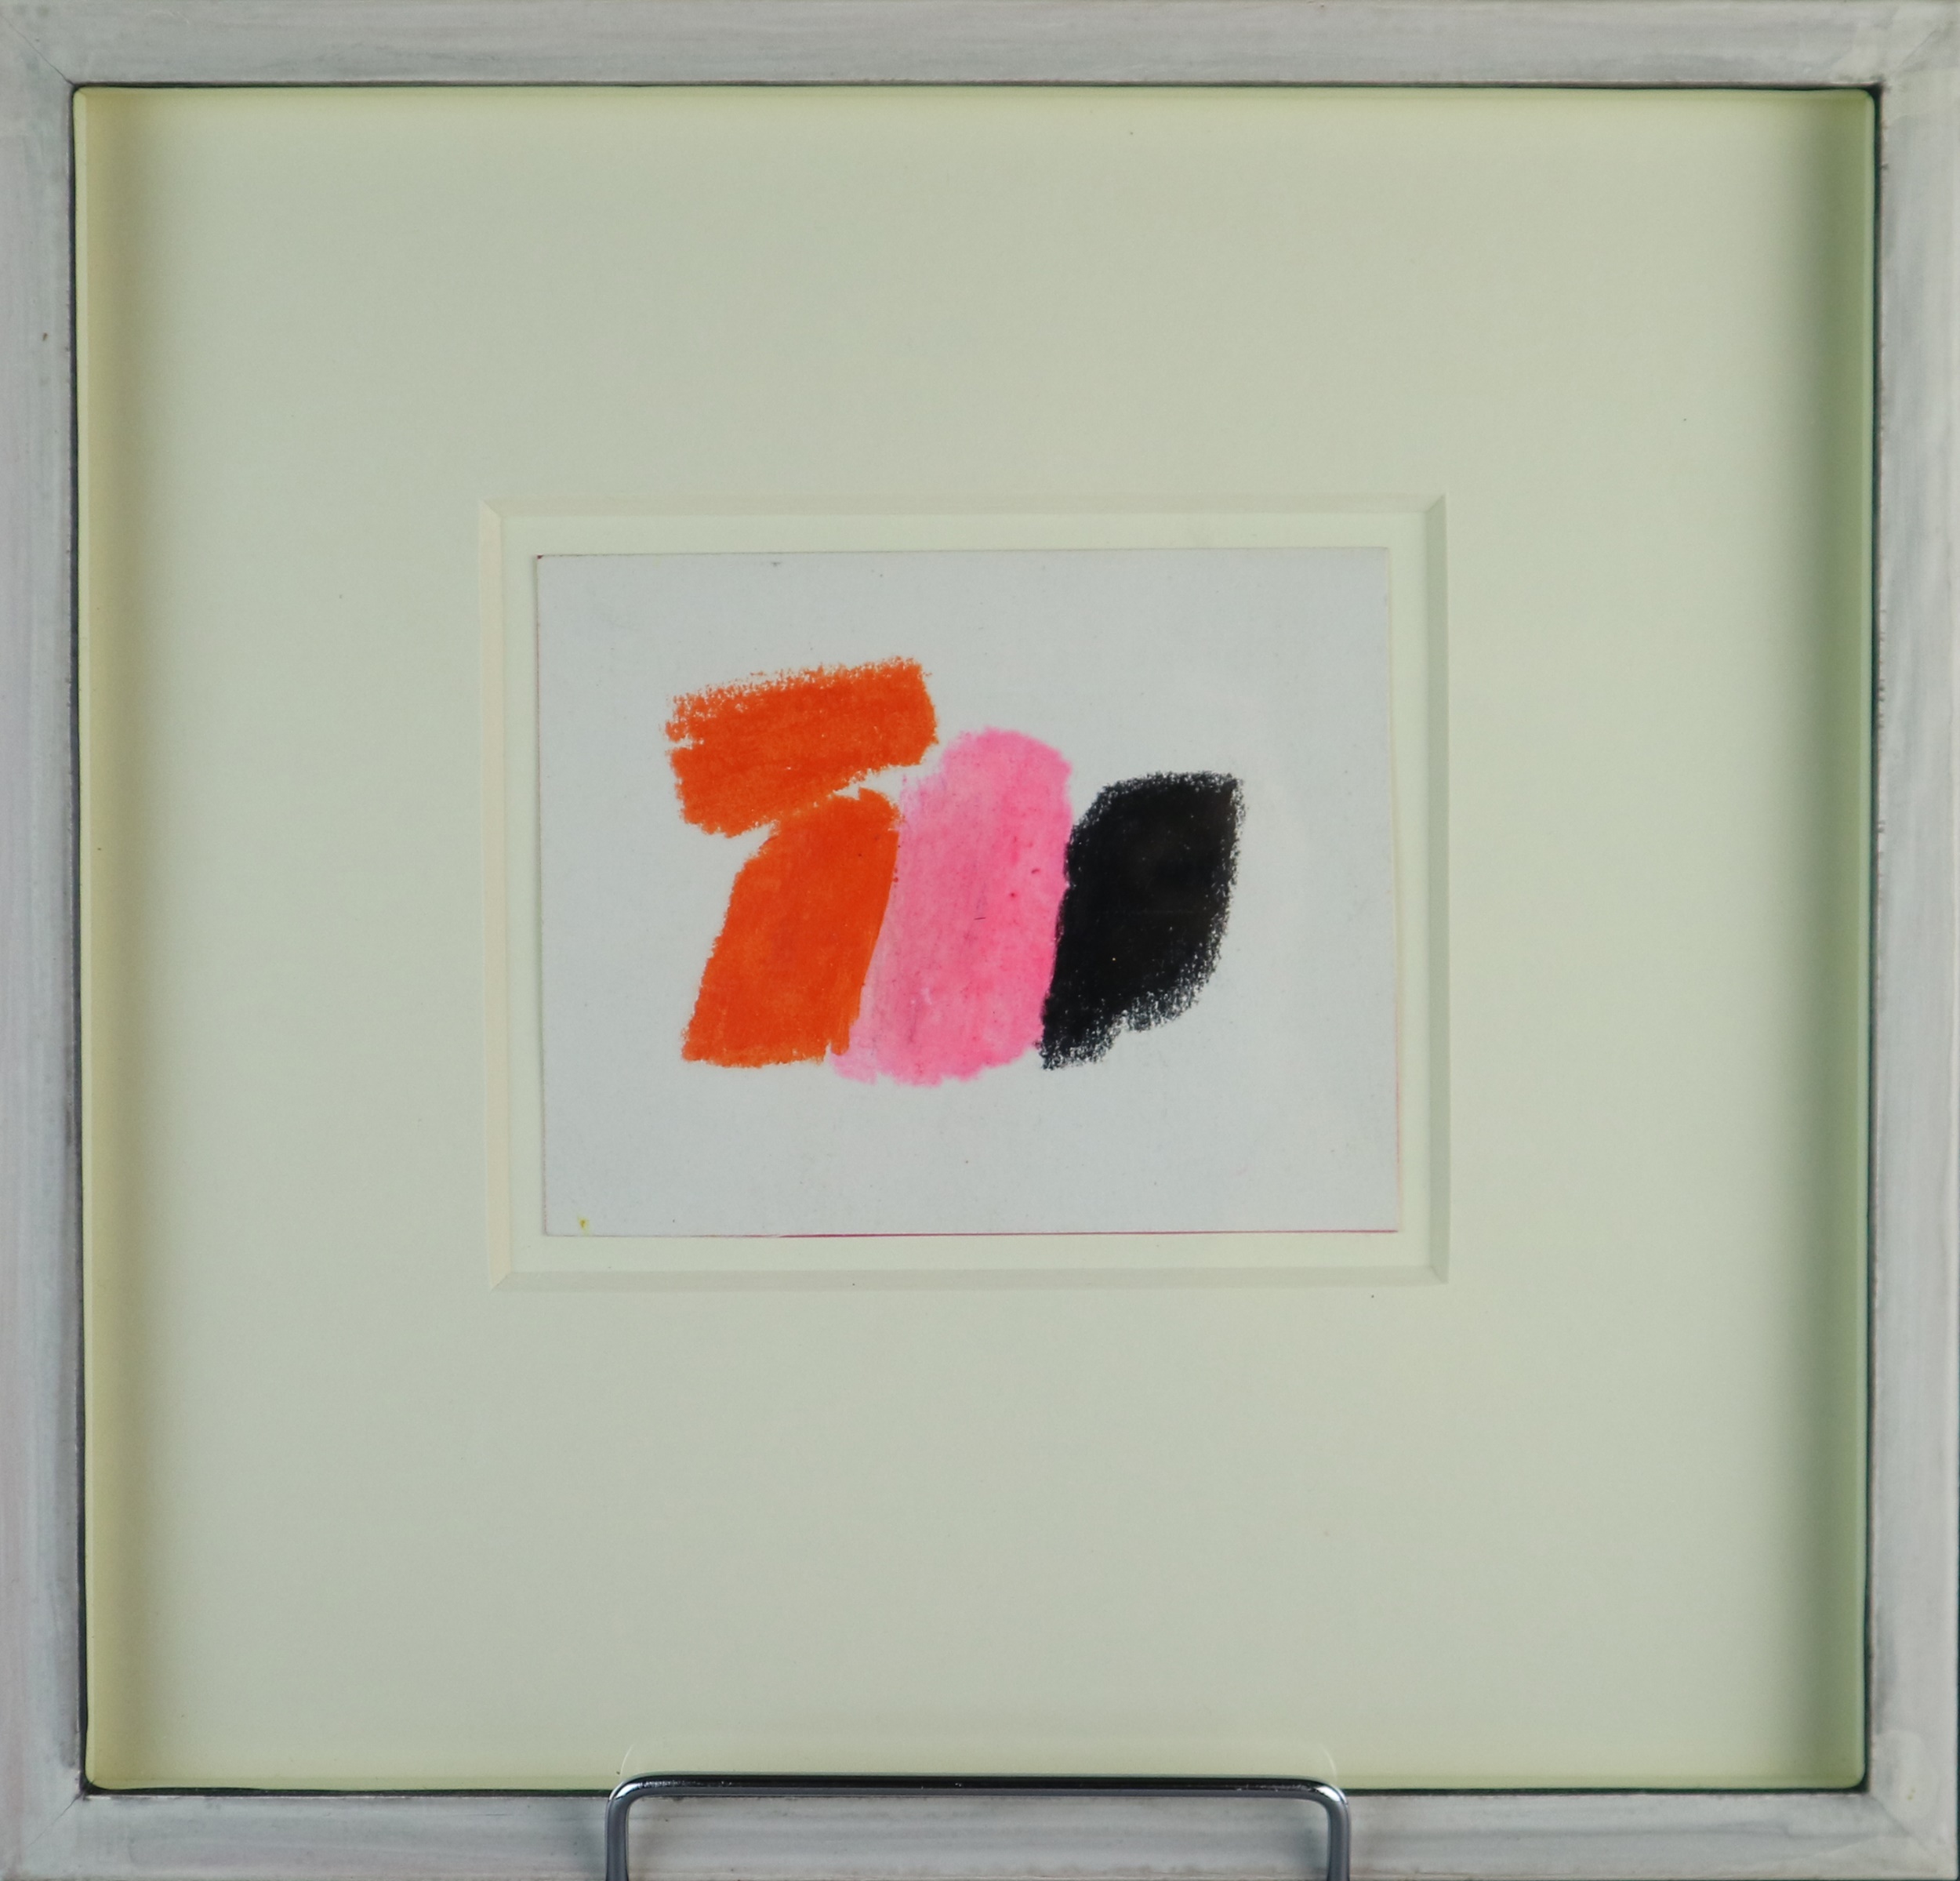 Bernard Farmer (British 1919-2002) Red and Black Abstract, pencil and crayon, measurements 10 x 13.5 - Image 5 of 5